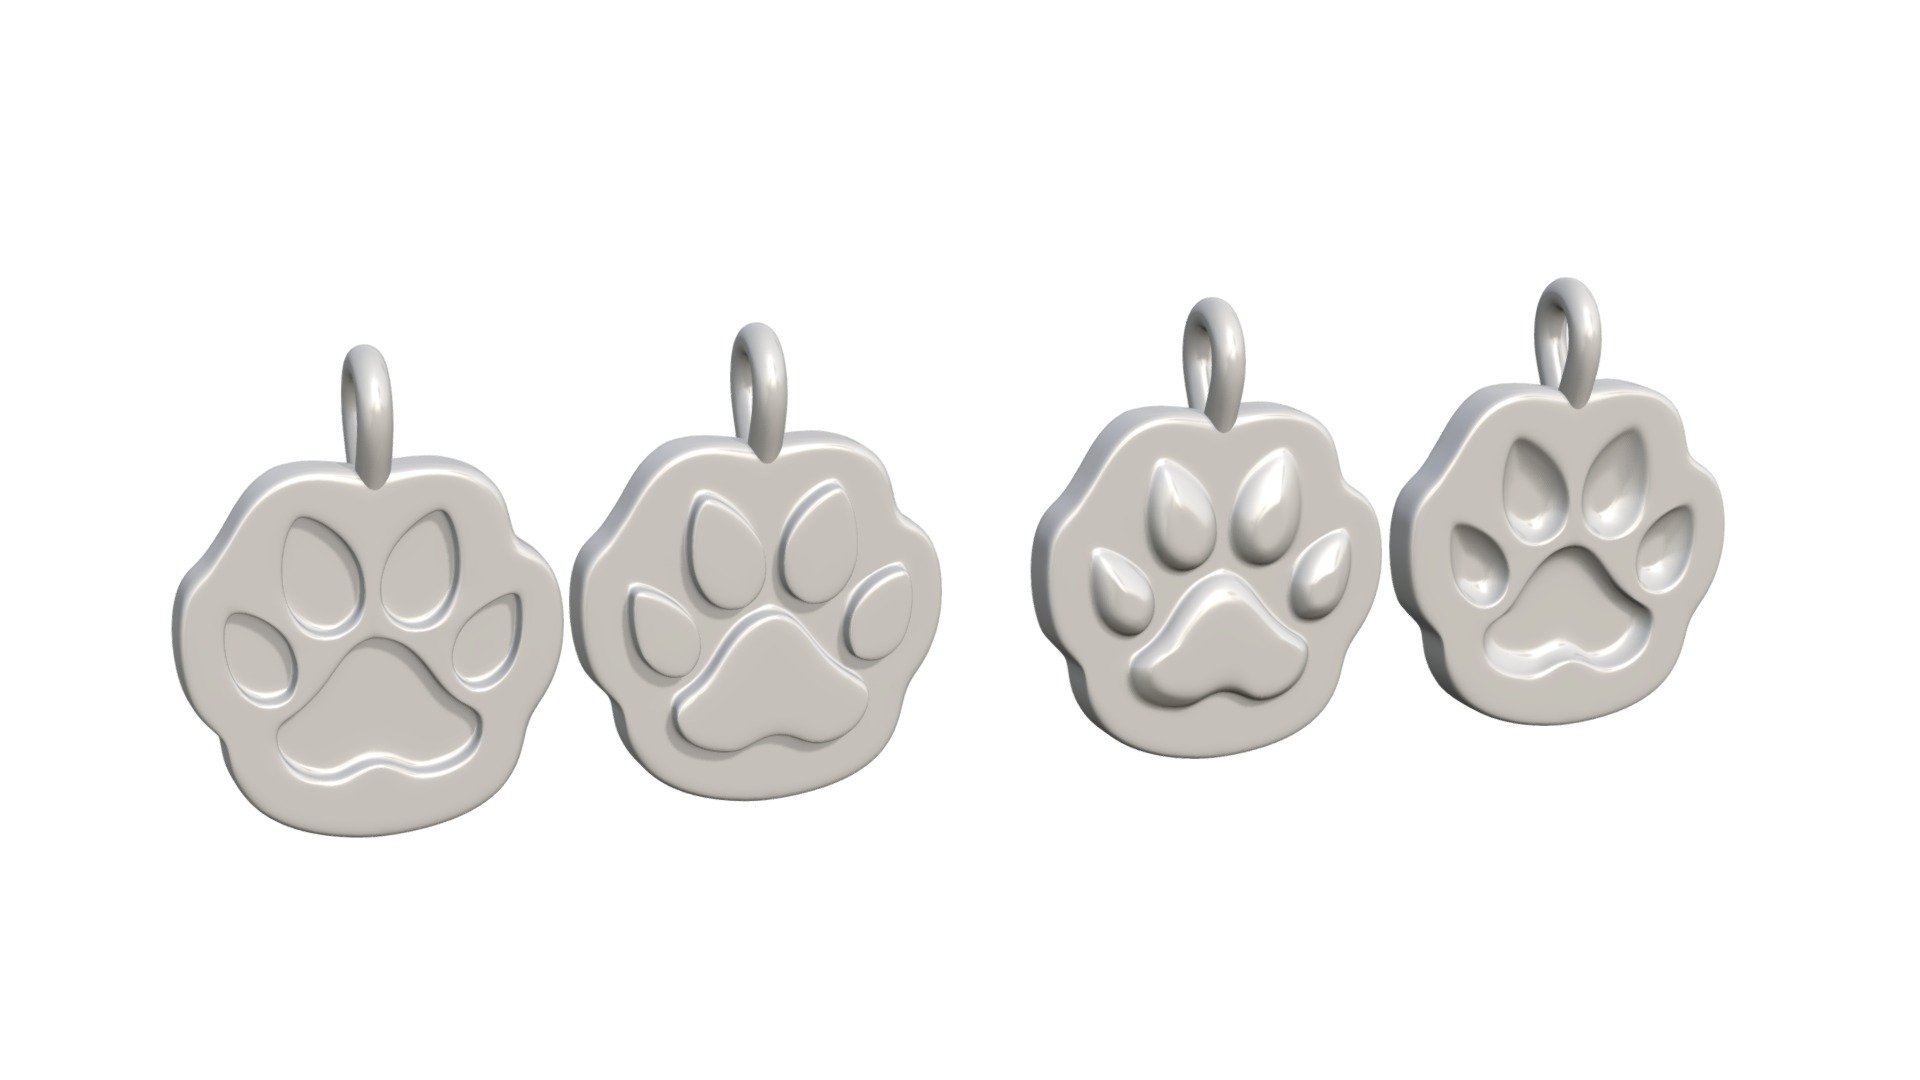 Highpoly model of paw pendant ready for 3d-print and to mark your lovers animal. Size with ring: 33 x 42 x 10 mm 3d model